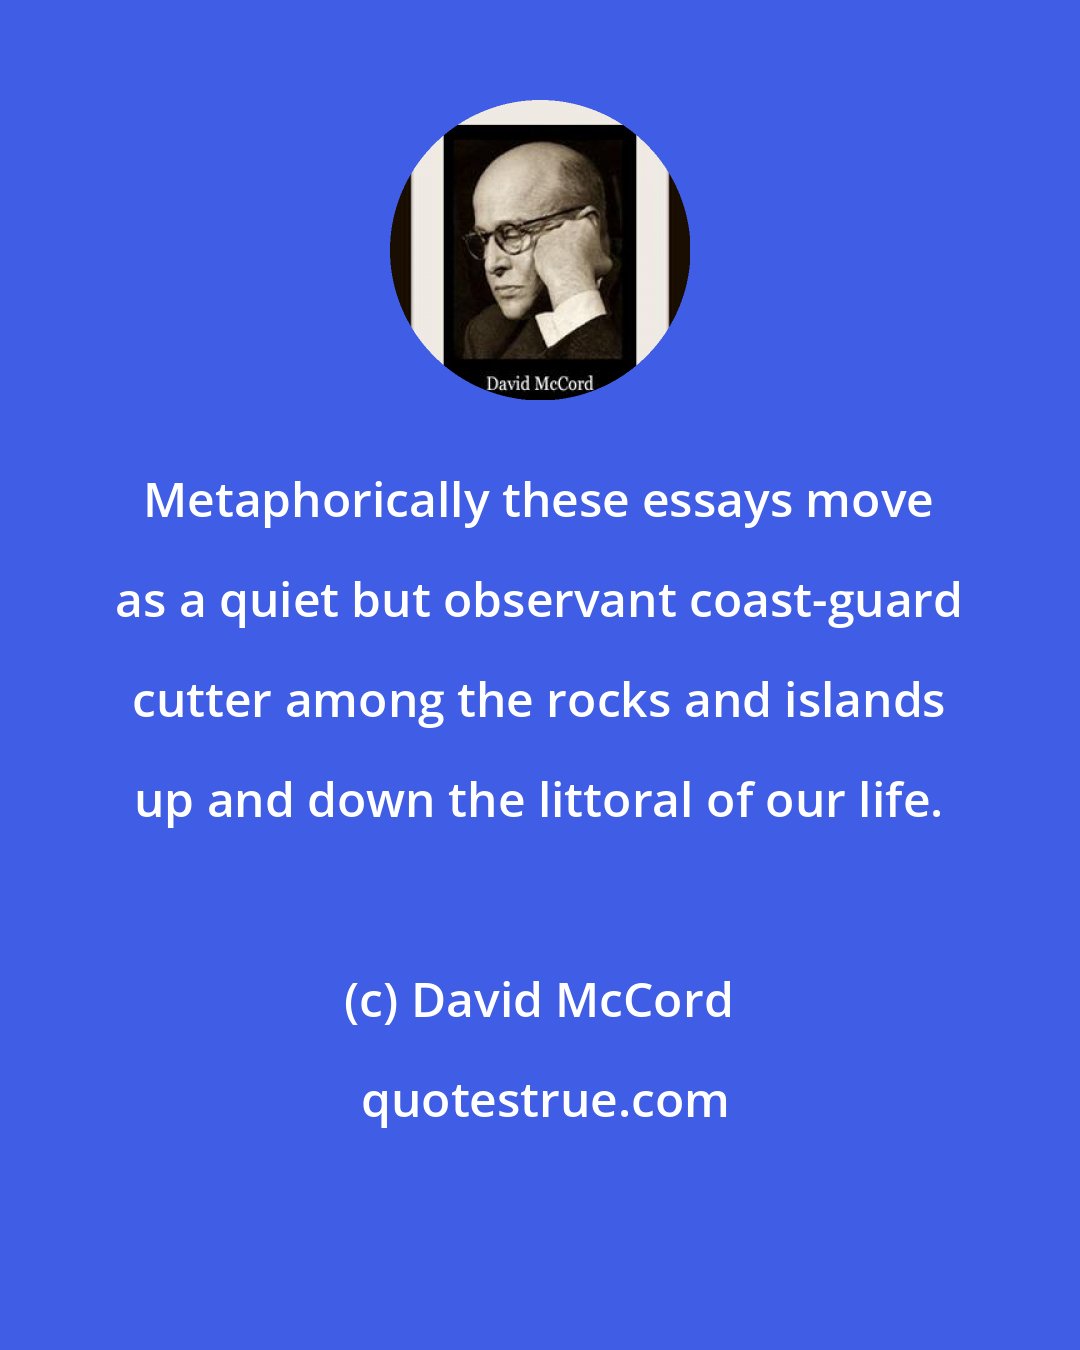 David McCord: Metaphorically these essays move as a quiet but observant coast-guard cutter among the rocks and islands up and down the littoral of our life.